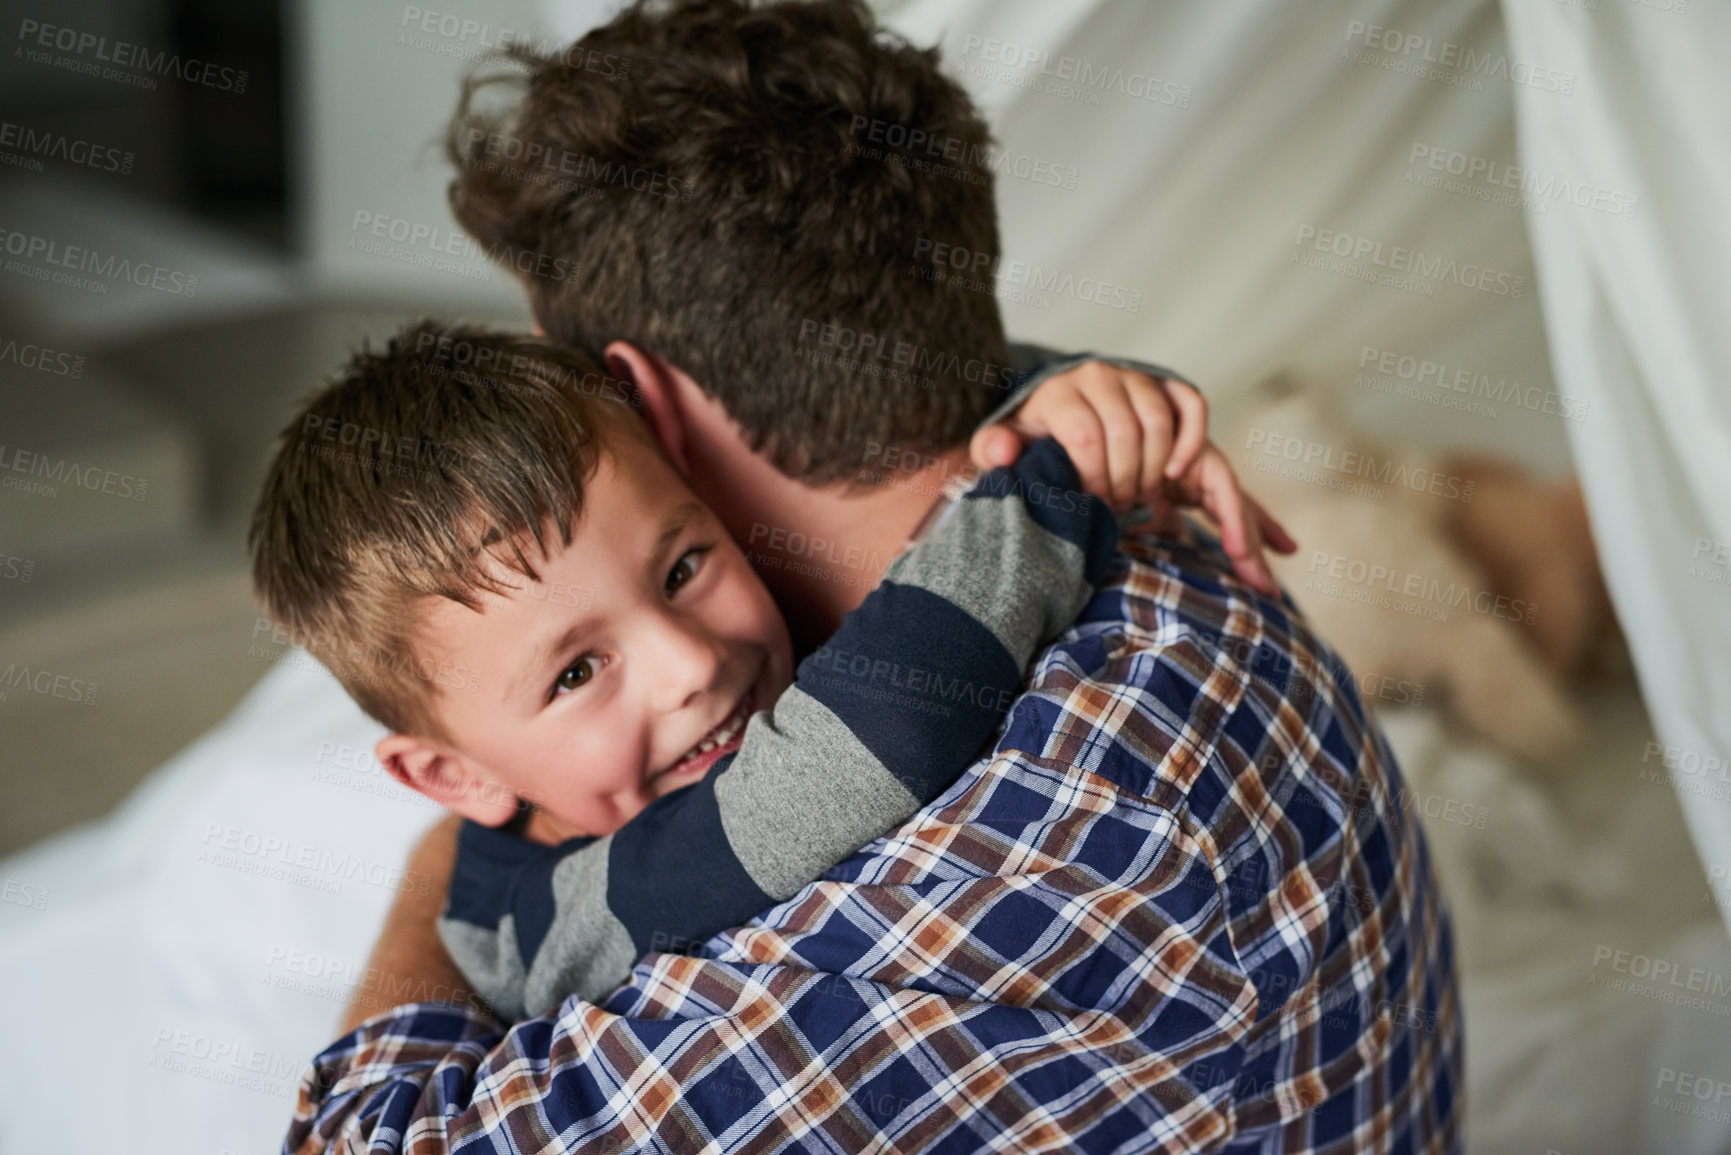 Buy stock photo High angle portrait of an adorable little boy embracing his dad in his bedroom at home